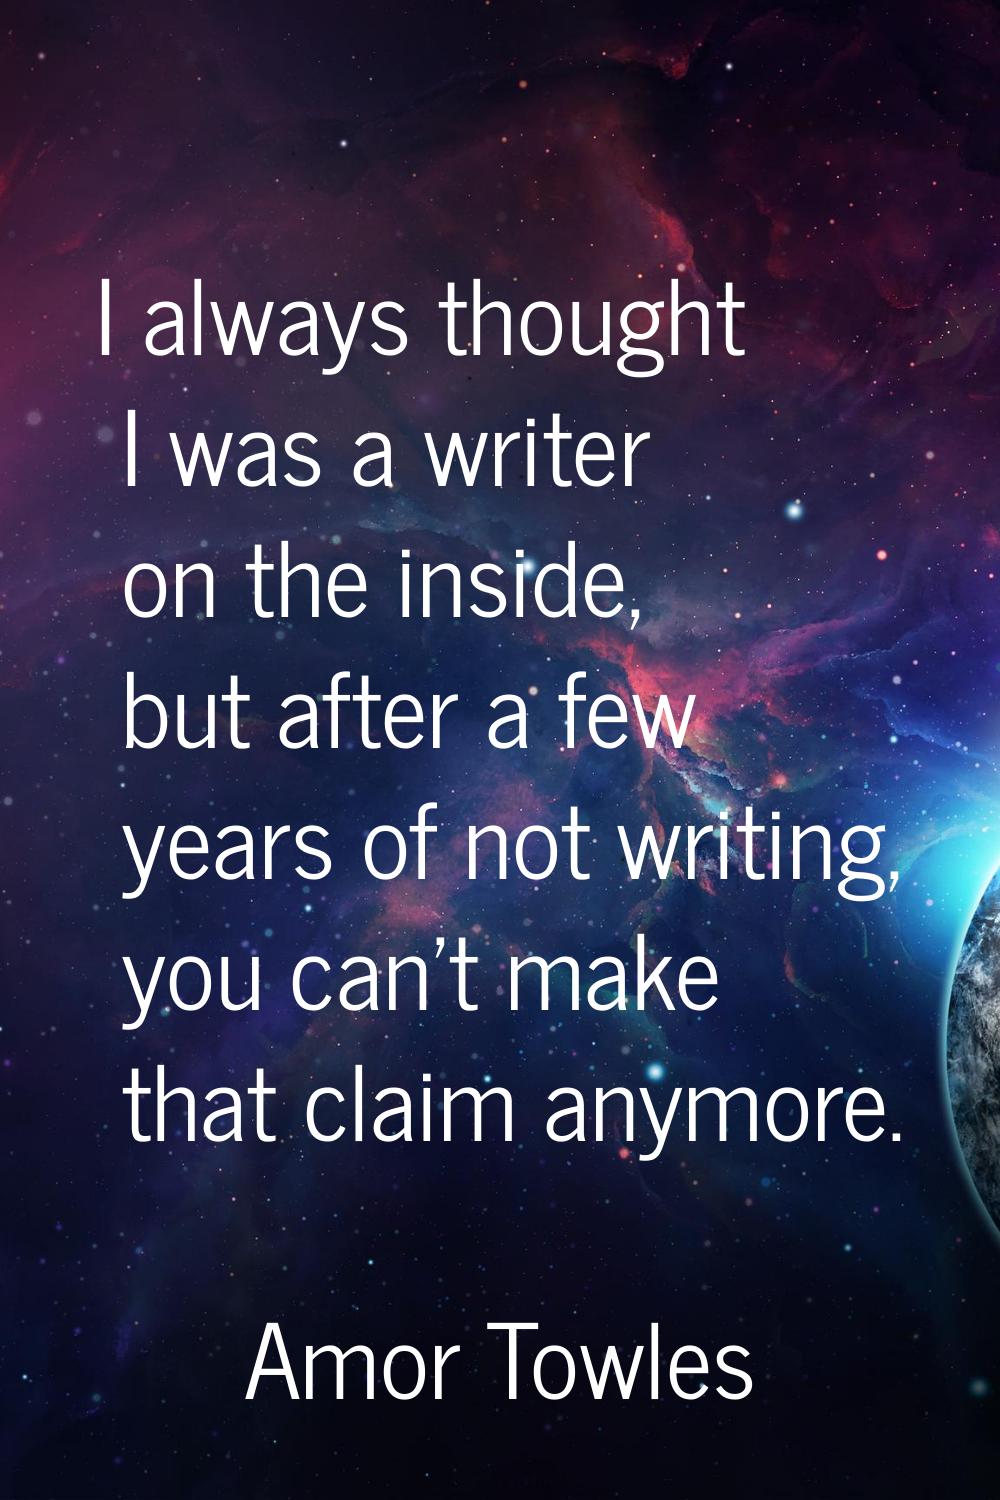 I always thought I was a writer on the inside, but after a few years of not writing, you can't make